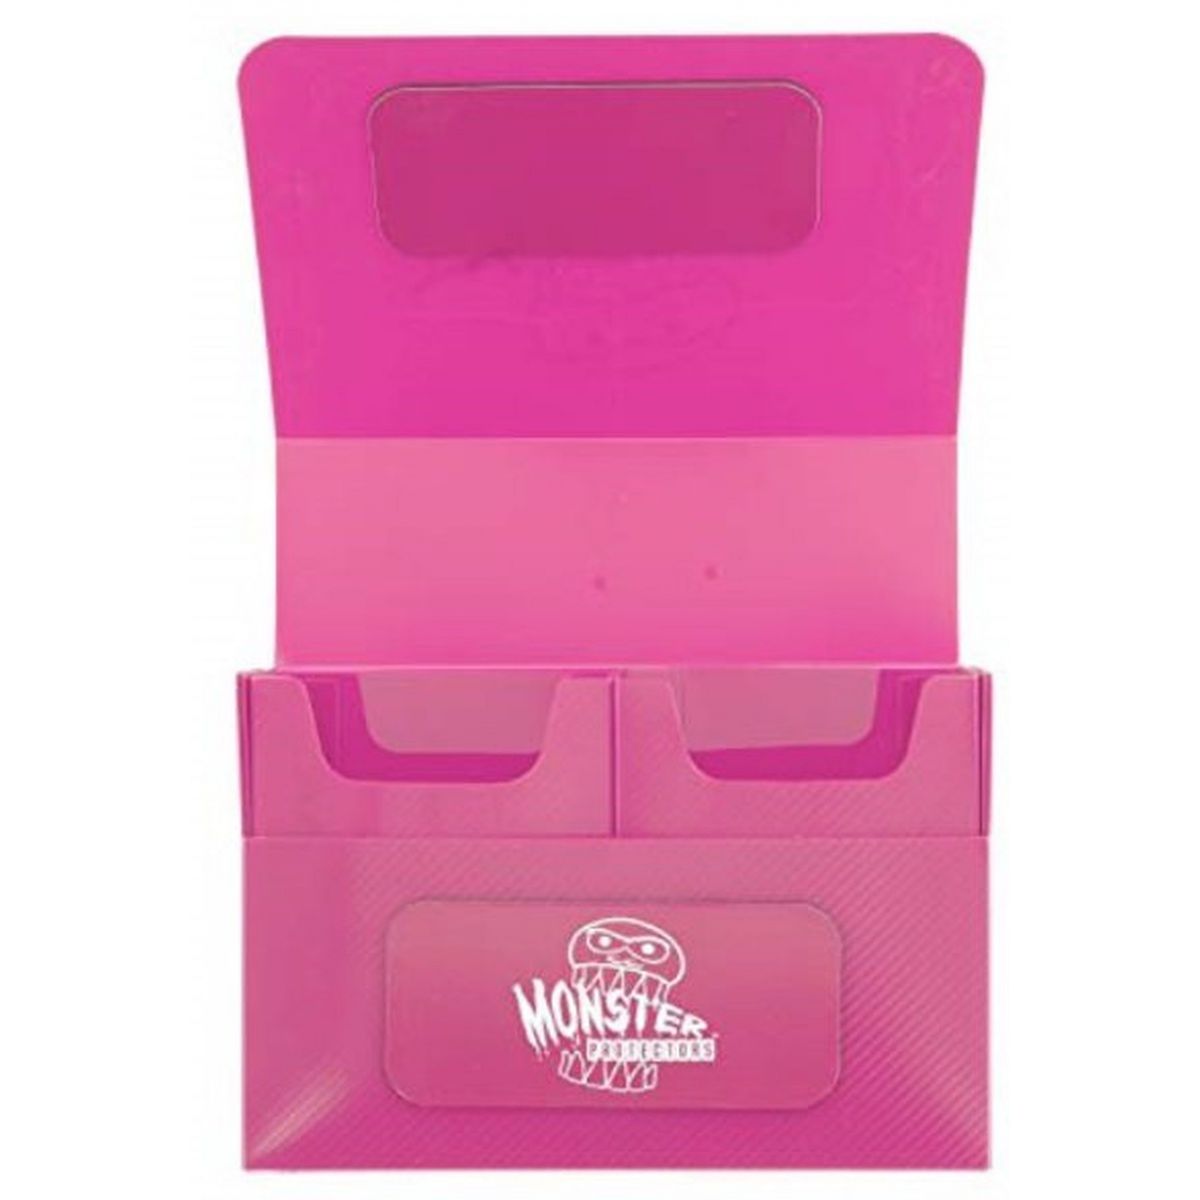 Monster Double Deck Box - Pink